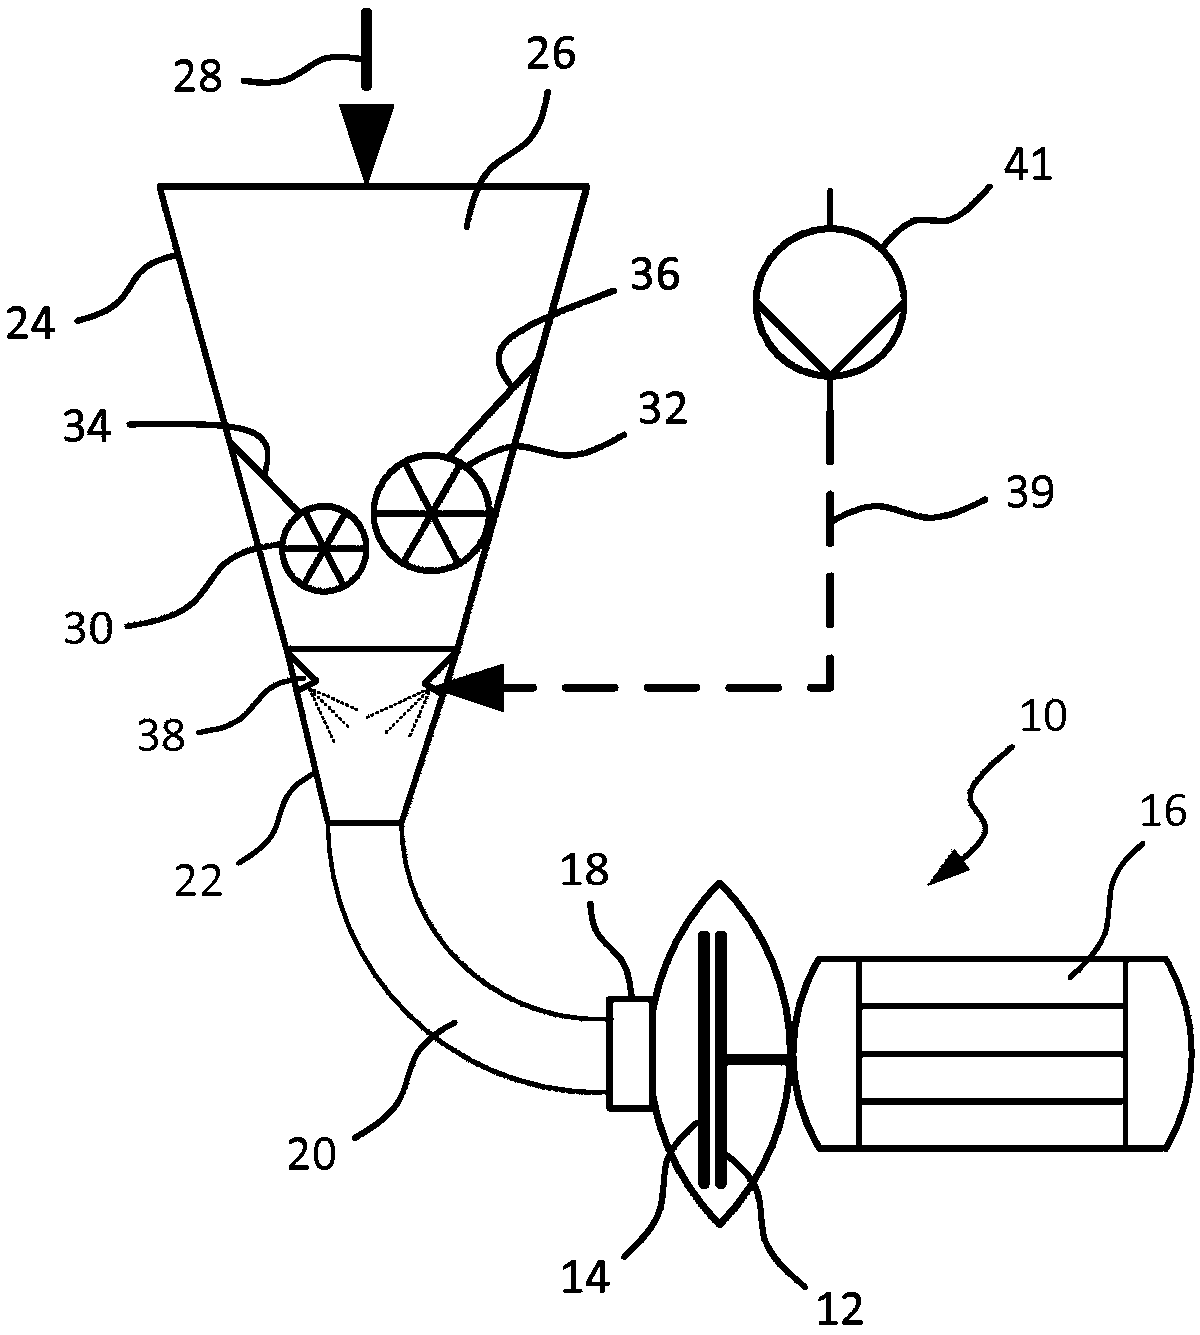 Device and method for the joint feeding of plastic particles and a liquid into a purification device